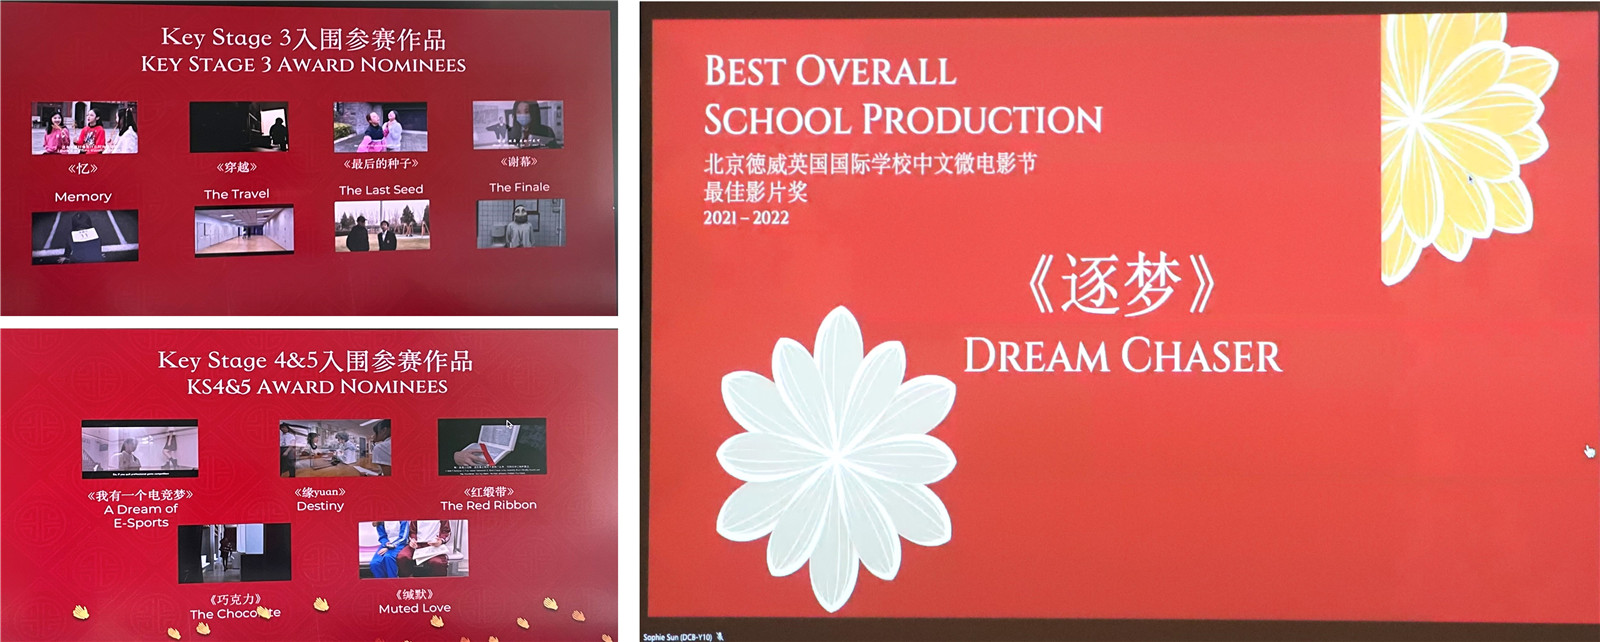 Nominee and best production award